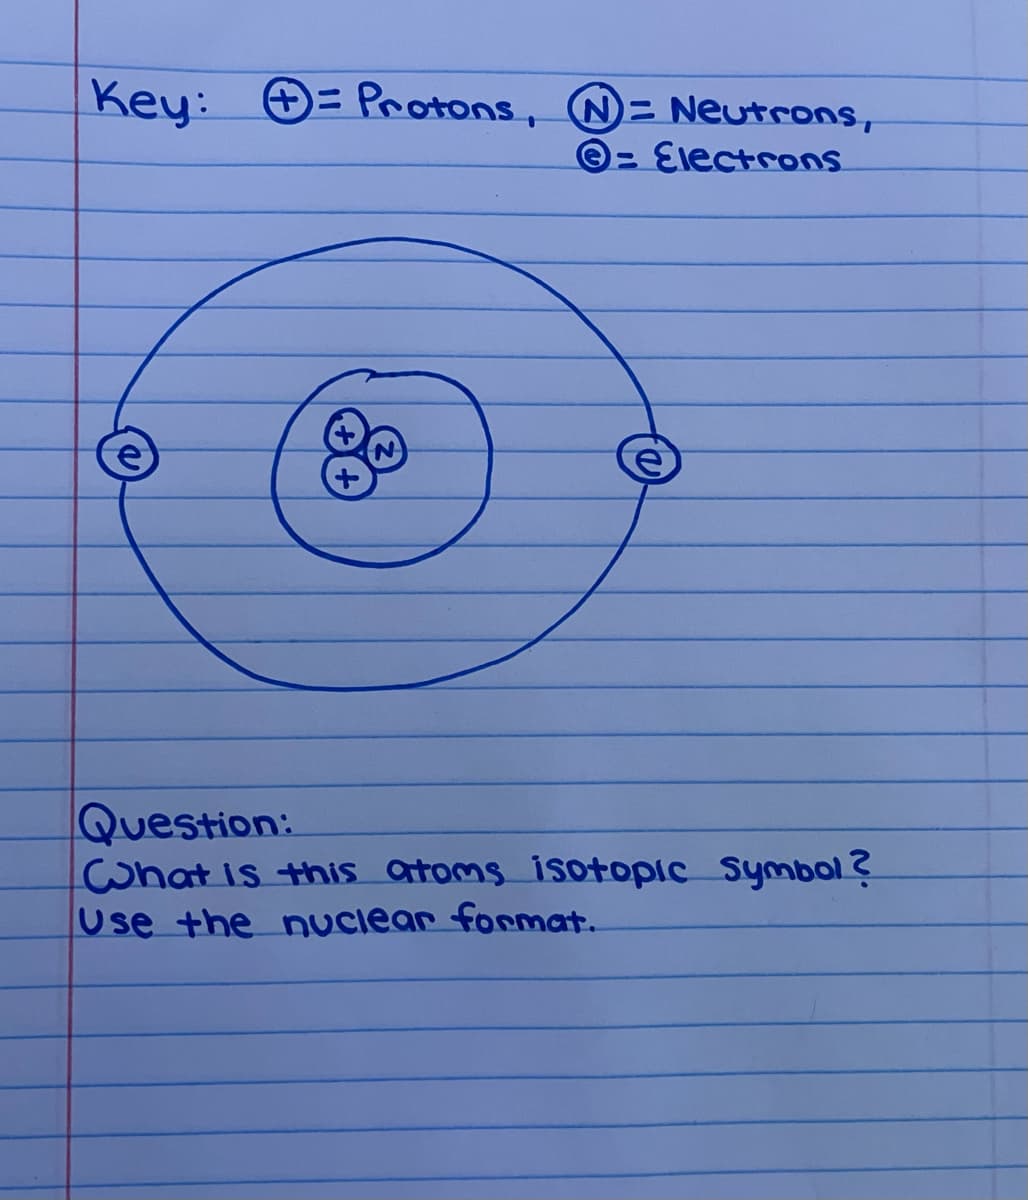 Key: O= Protons, = Neutrons,
O= Electrons
Question:
what Is this atoms isotopic Symbol ?
Use the nuciear format.
